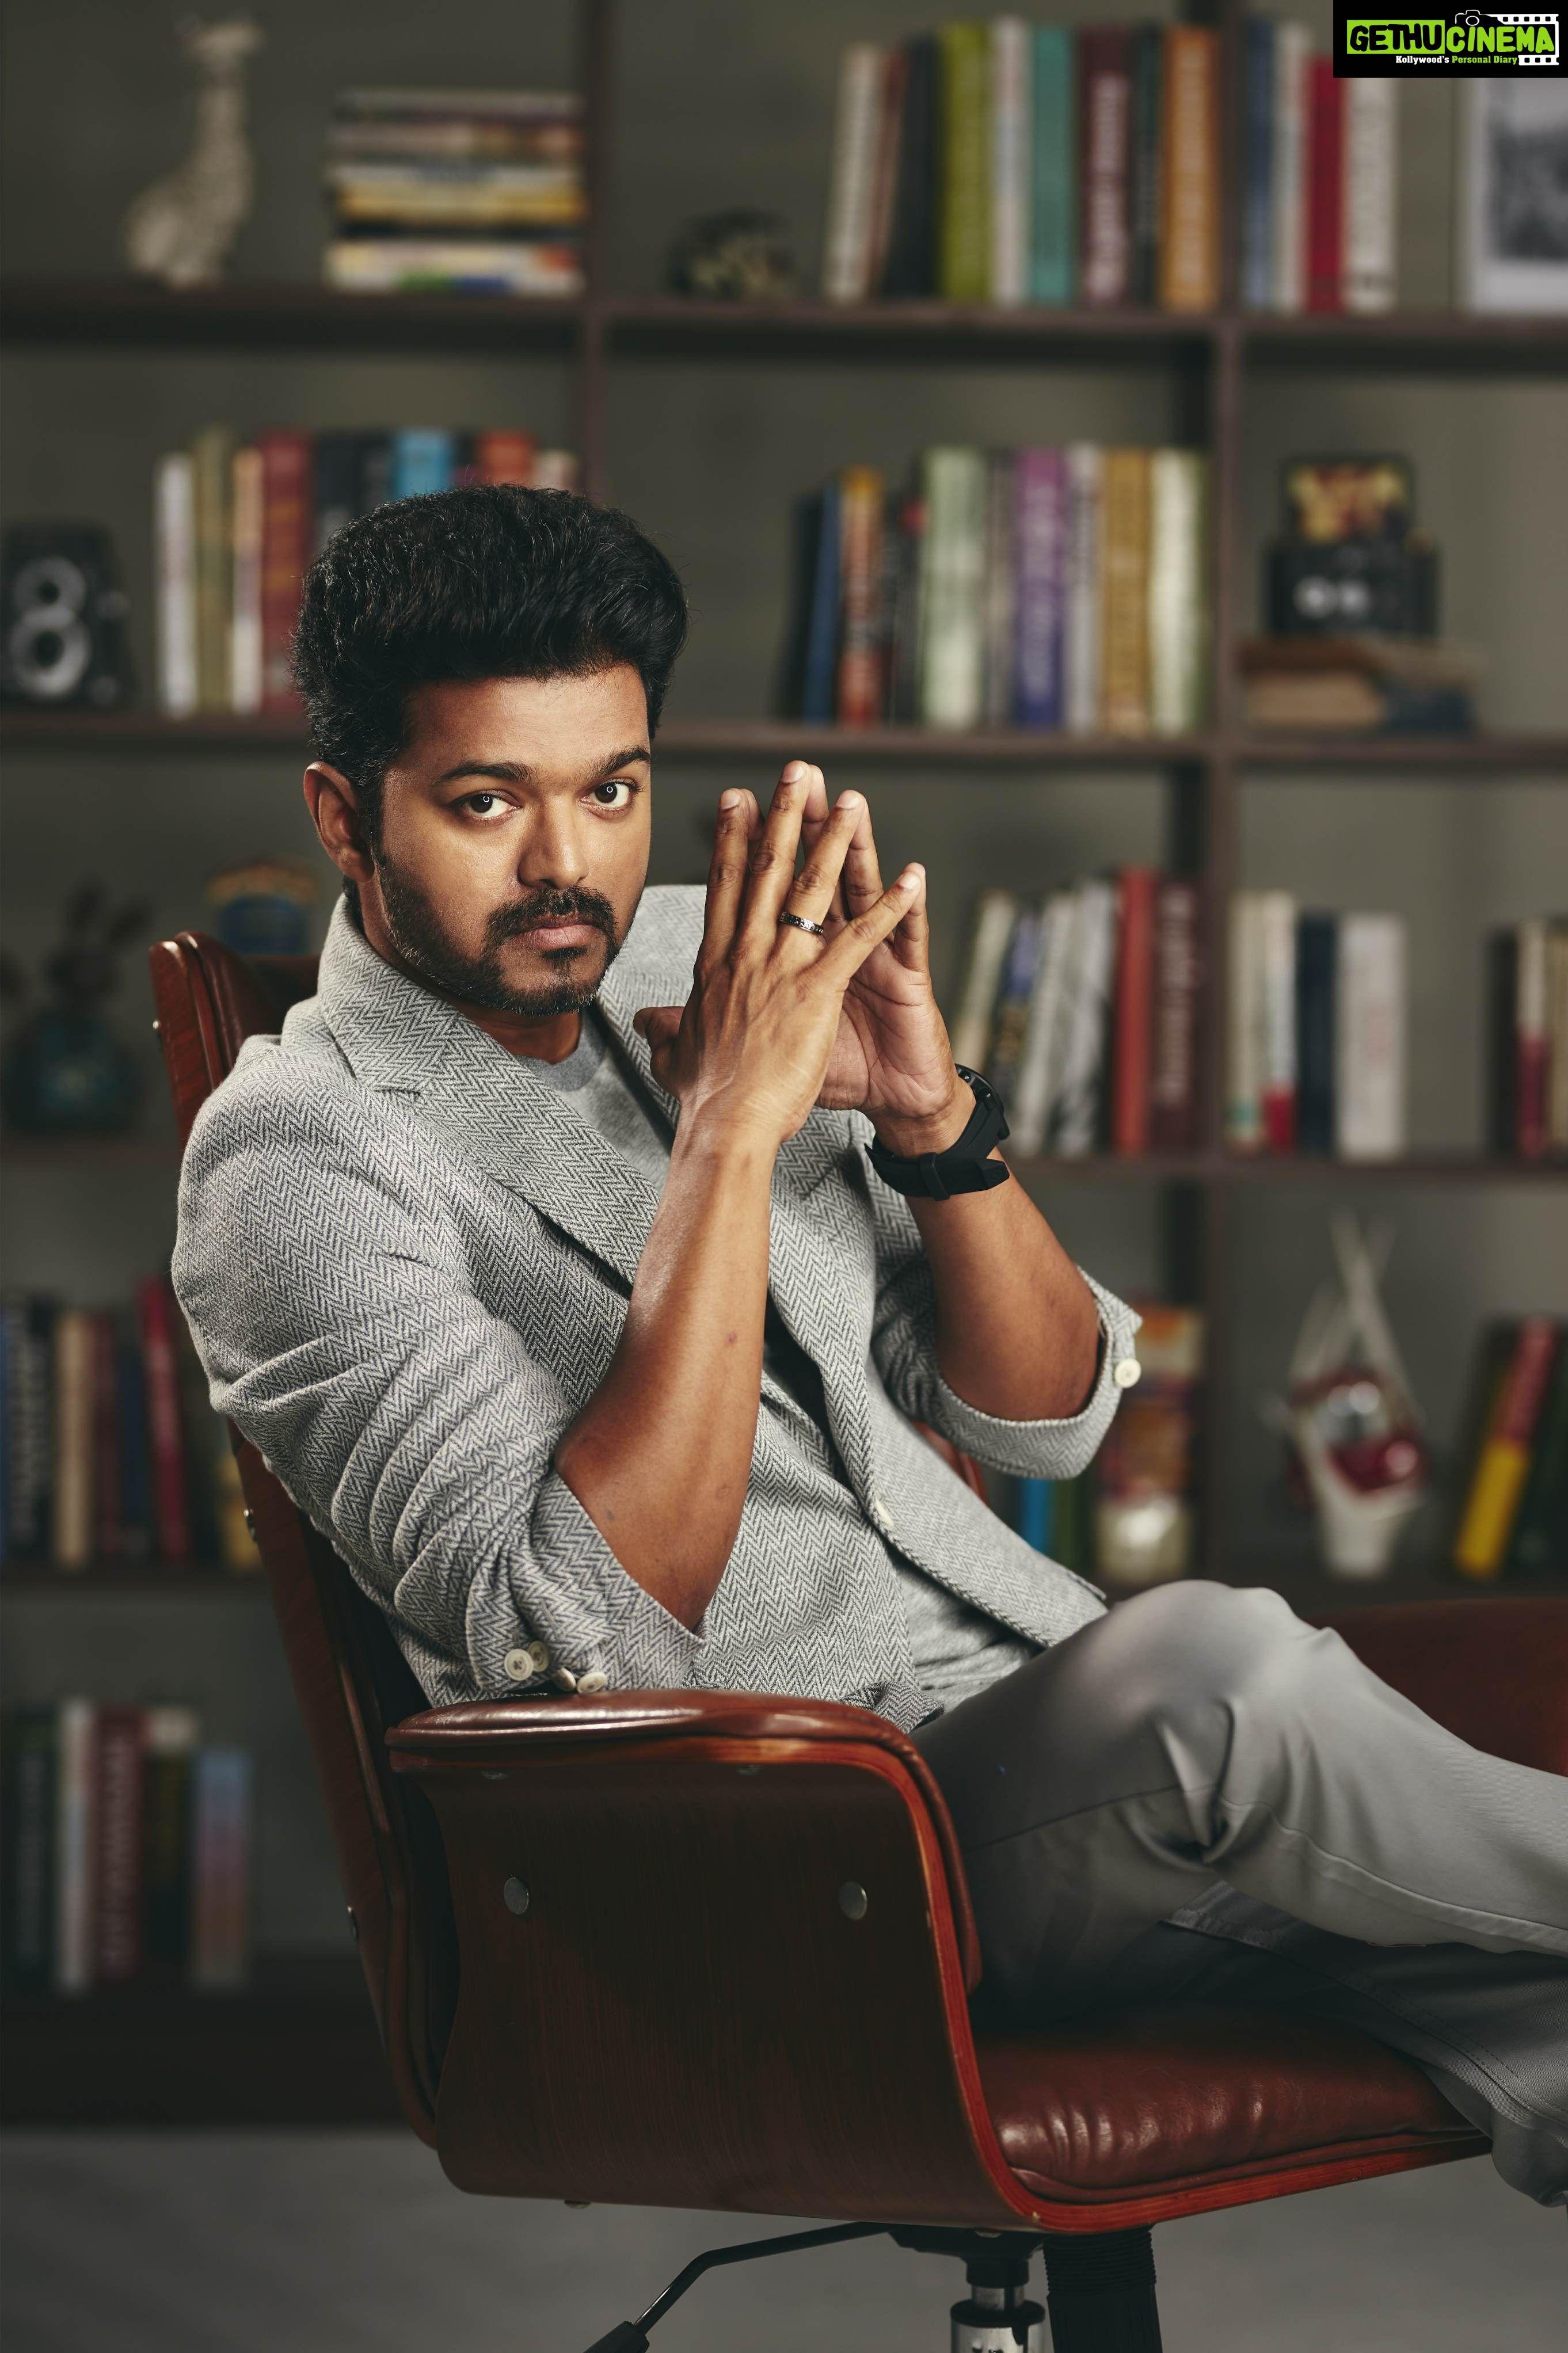 Sarkar Ultra HD Photo For Fans Poster Making. High Quality Stills Cinema. Vijay actor, Actor photo, Actor picture